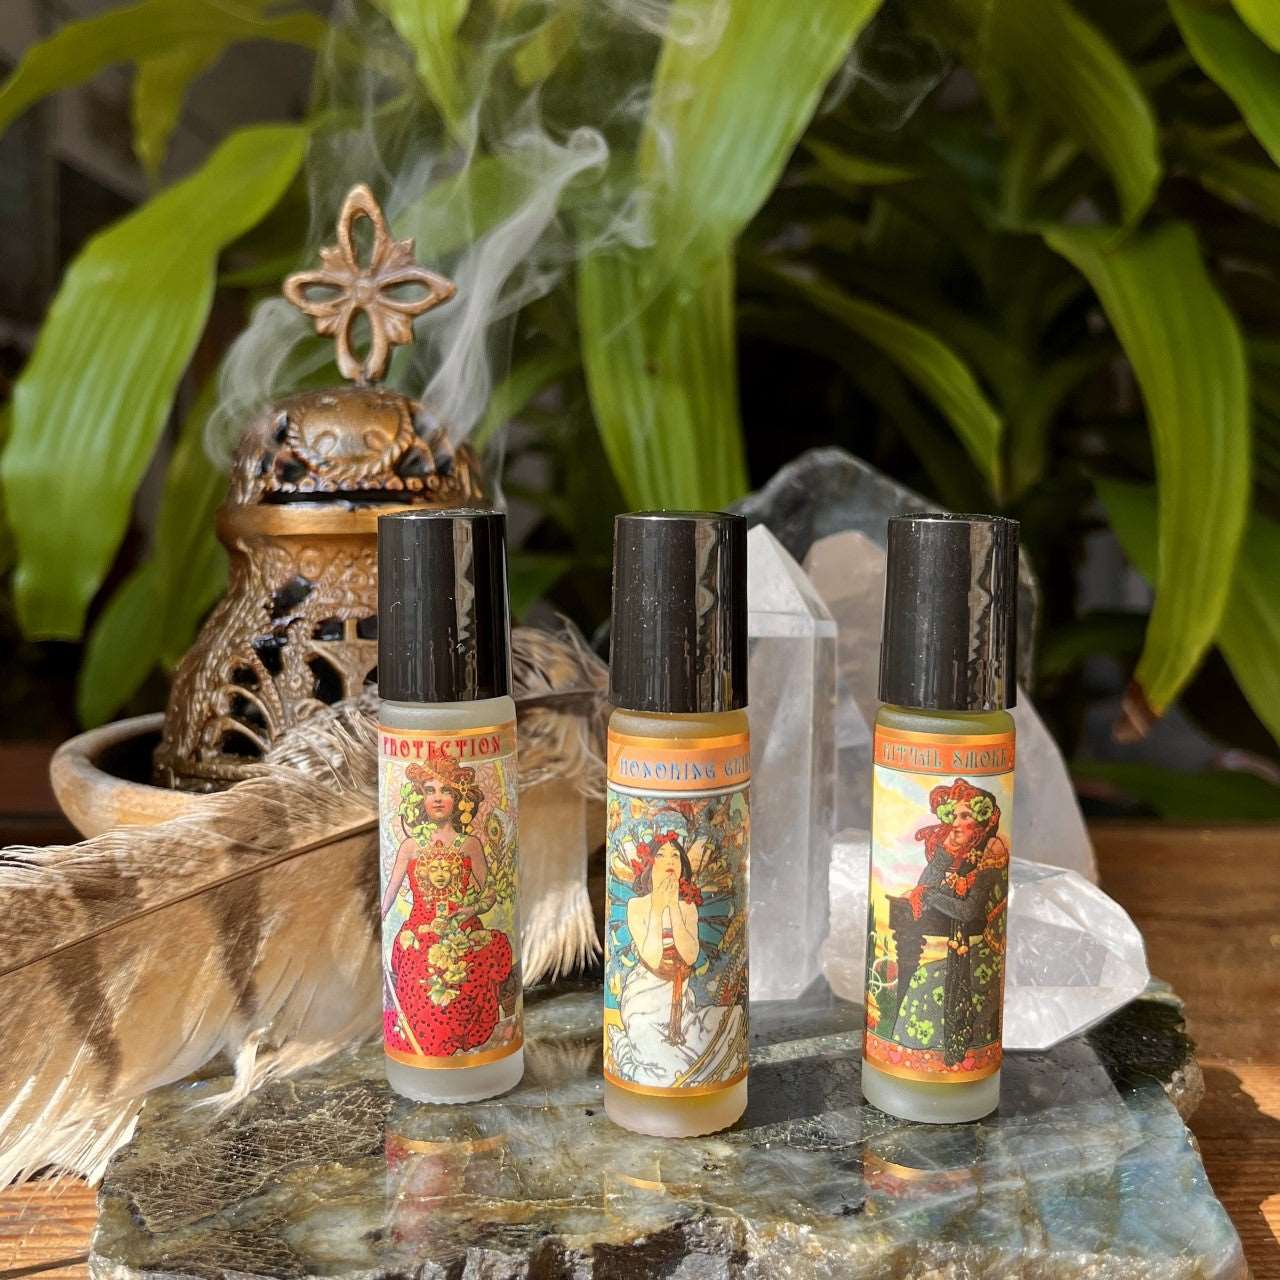 1 oz Ritual Smoke Natural Roll-On Perfume with Sacred Organic Essential Oils of Orange, Fir, Cedar, & Firewood Infused in Organic MCT Oil for Spiritual Connection and Tranquility.